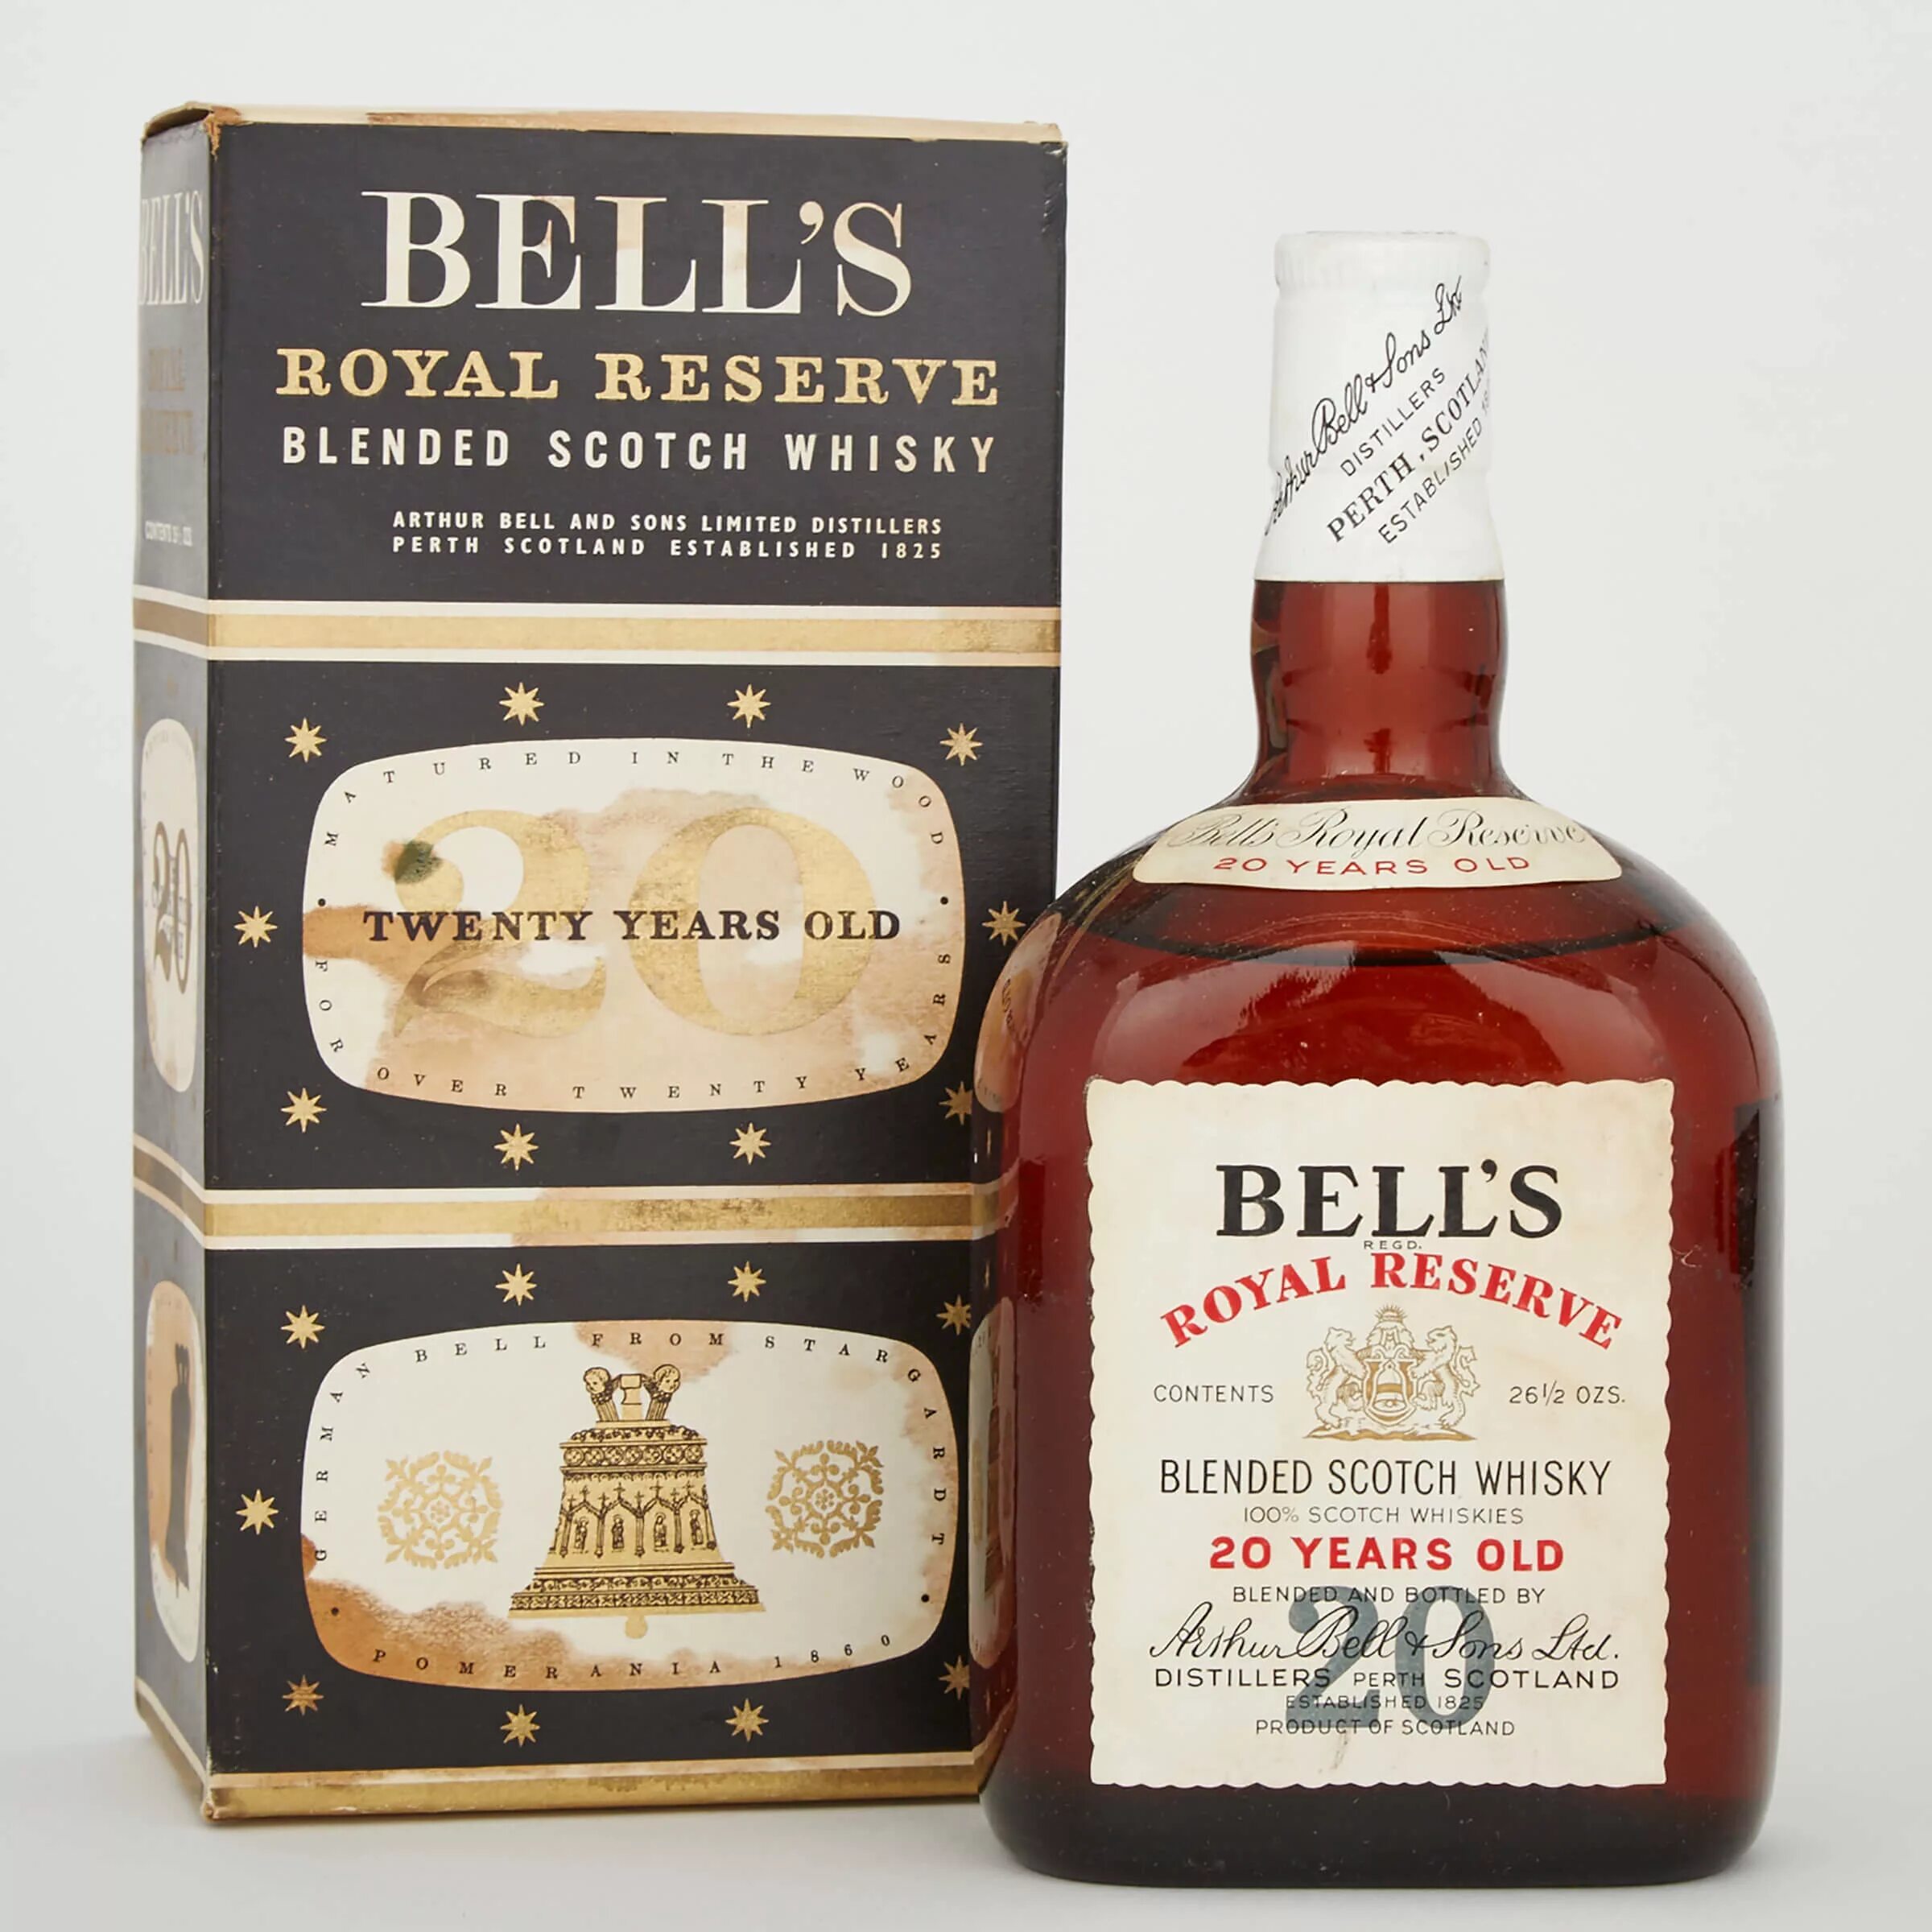 Bells whisky. Виски Royal Blended Whisky Scotch. Bells Blended Scotch Whisky. Bells Blend Scotch виски. Виски Bells Blended Scotch Whisky 1825.